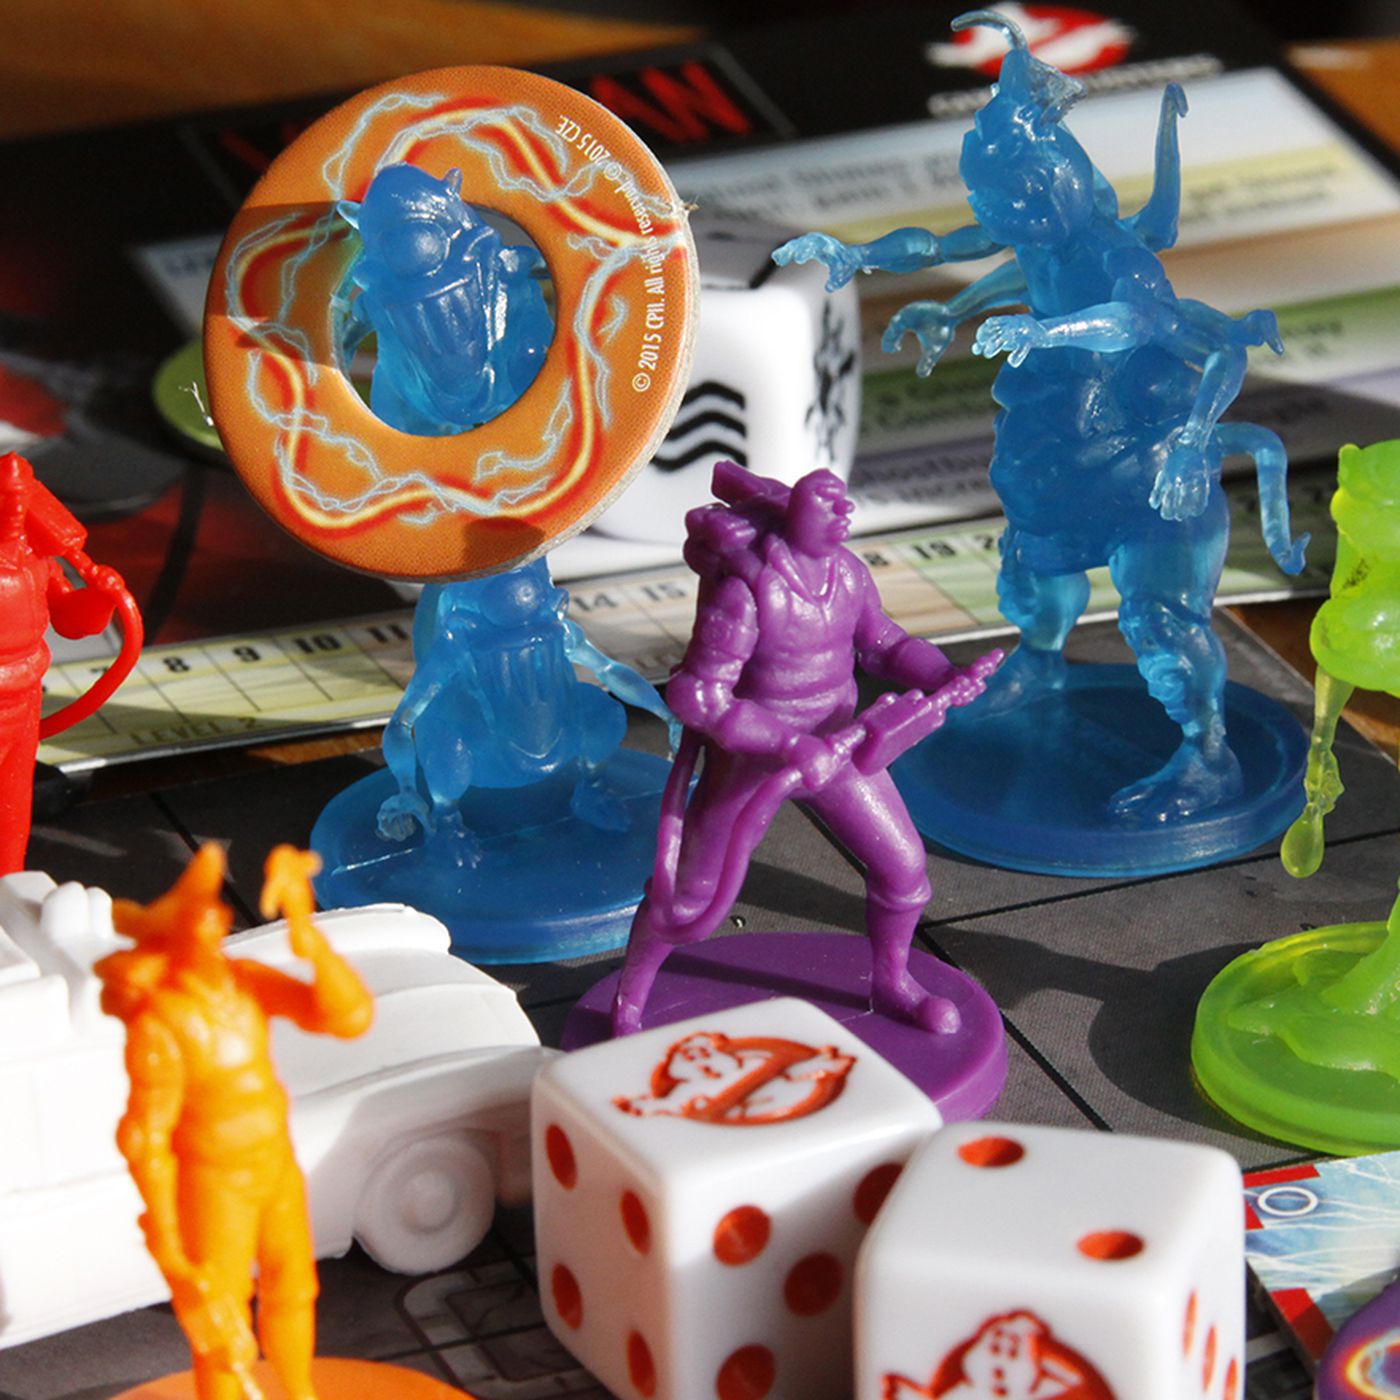 So how does a $1.5 million Ghostbusters board game play? - Polygon